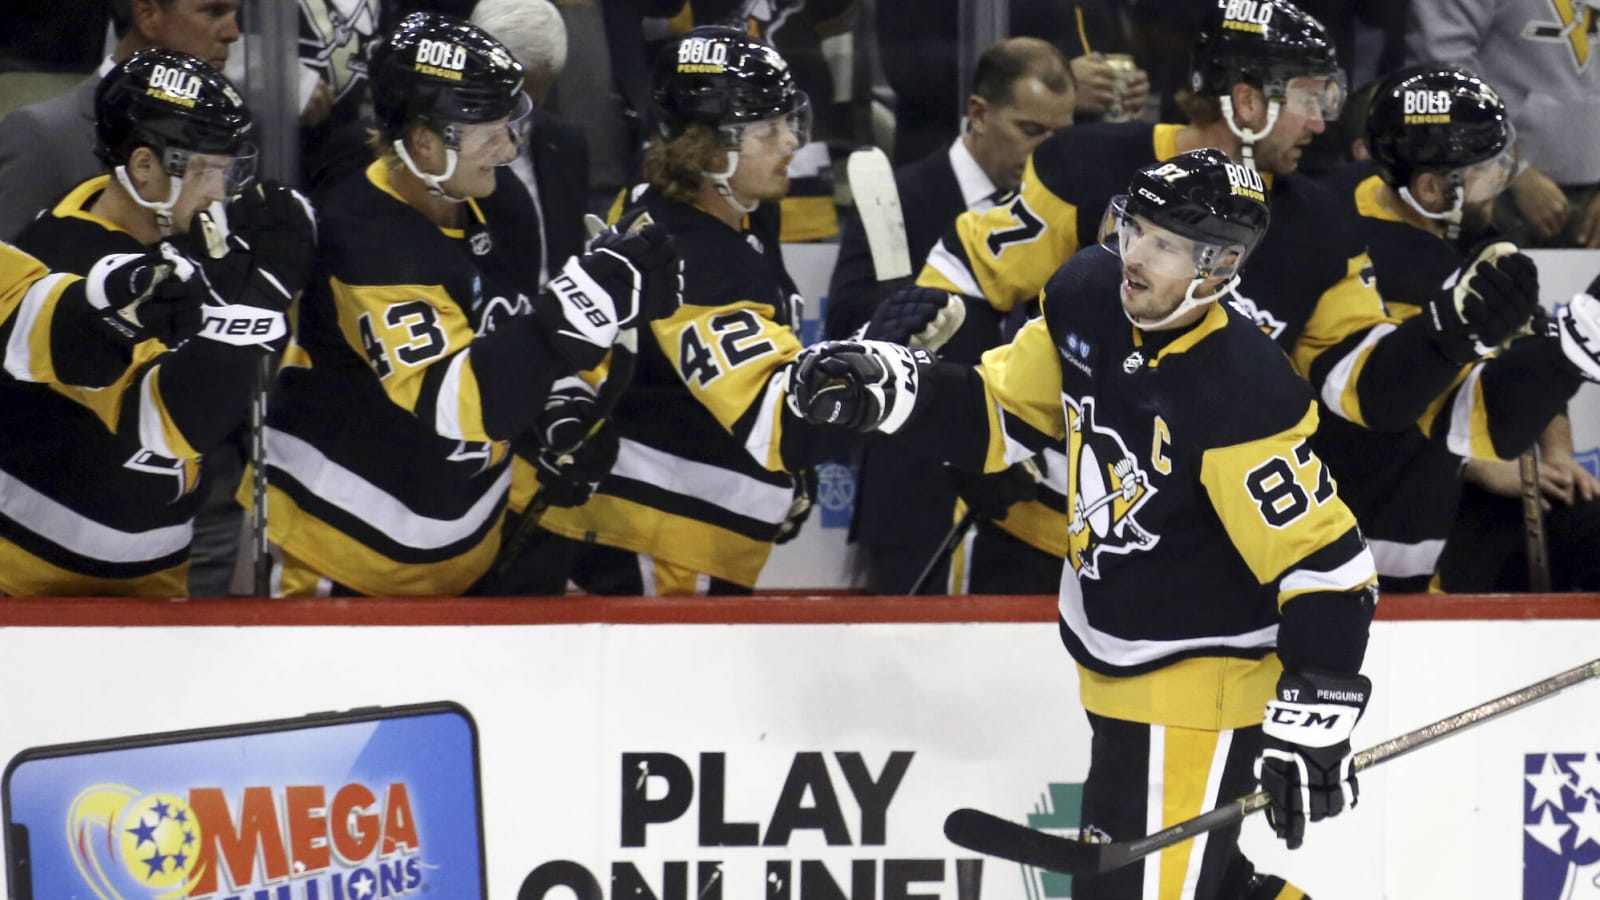 NHL power rankings: The Penguins are flying high